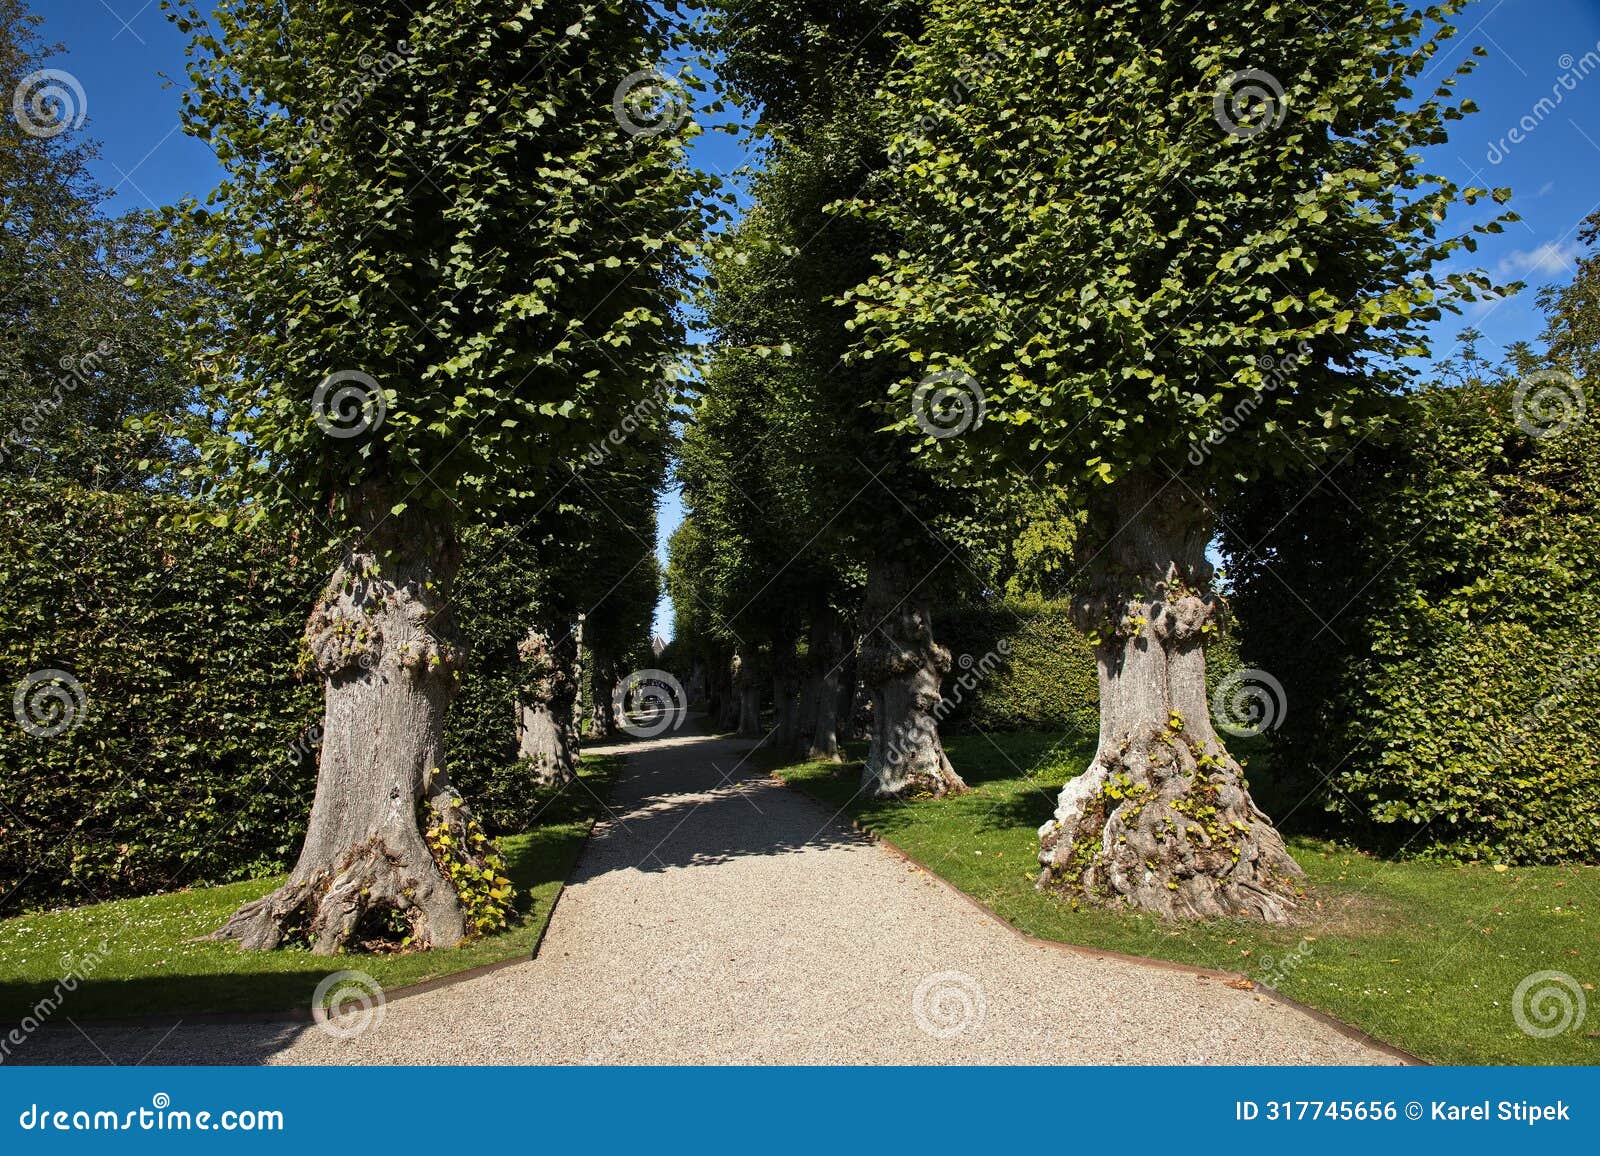 alley of lime trees in the palace garden of egeskov near kvaerndrup, island of funen, denmark